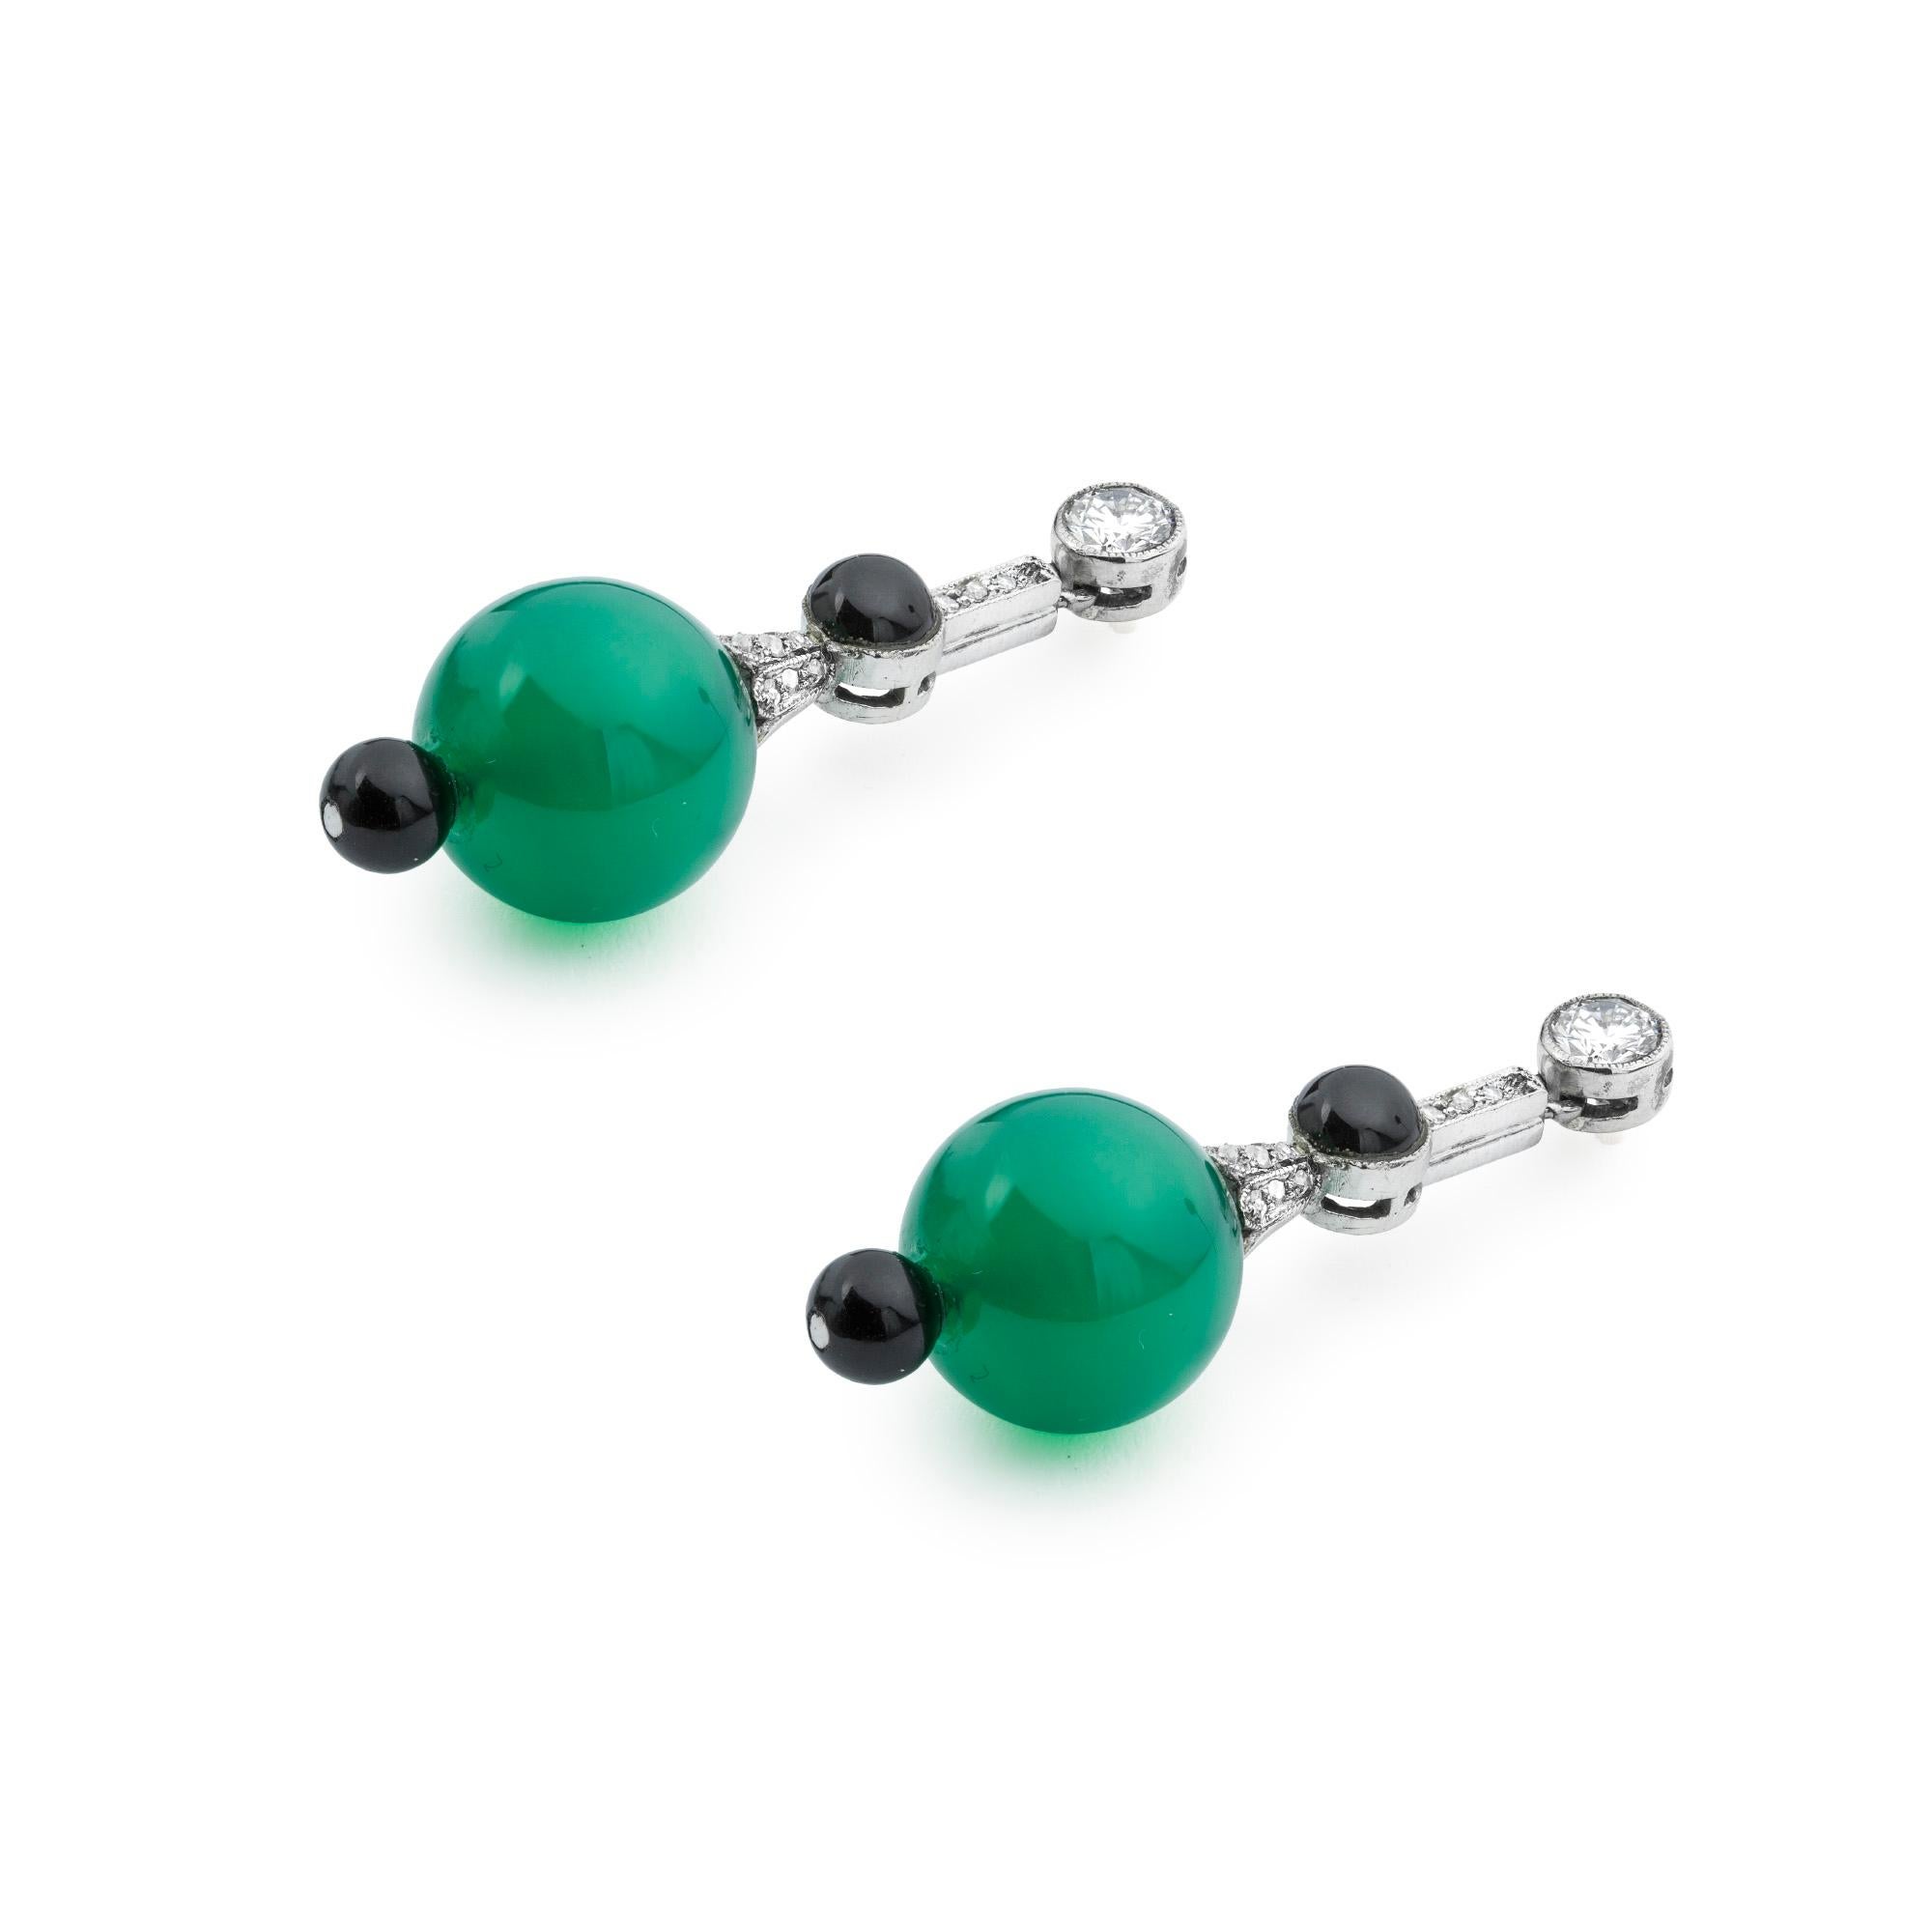 A pair of Art Deco chrysoprase, onyx and diamond drop earrings, each earring comprising a round brilliant-cut diamond on top, estimated to weigh 0.20ct each, suspending a rose-cut diamond and onyx set run, suspending a chrysoprase bead, measuring